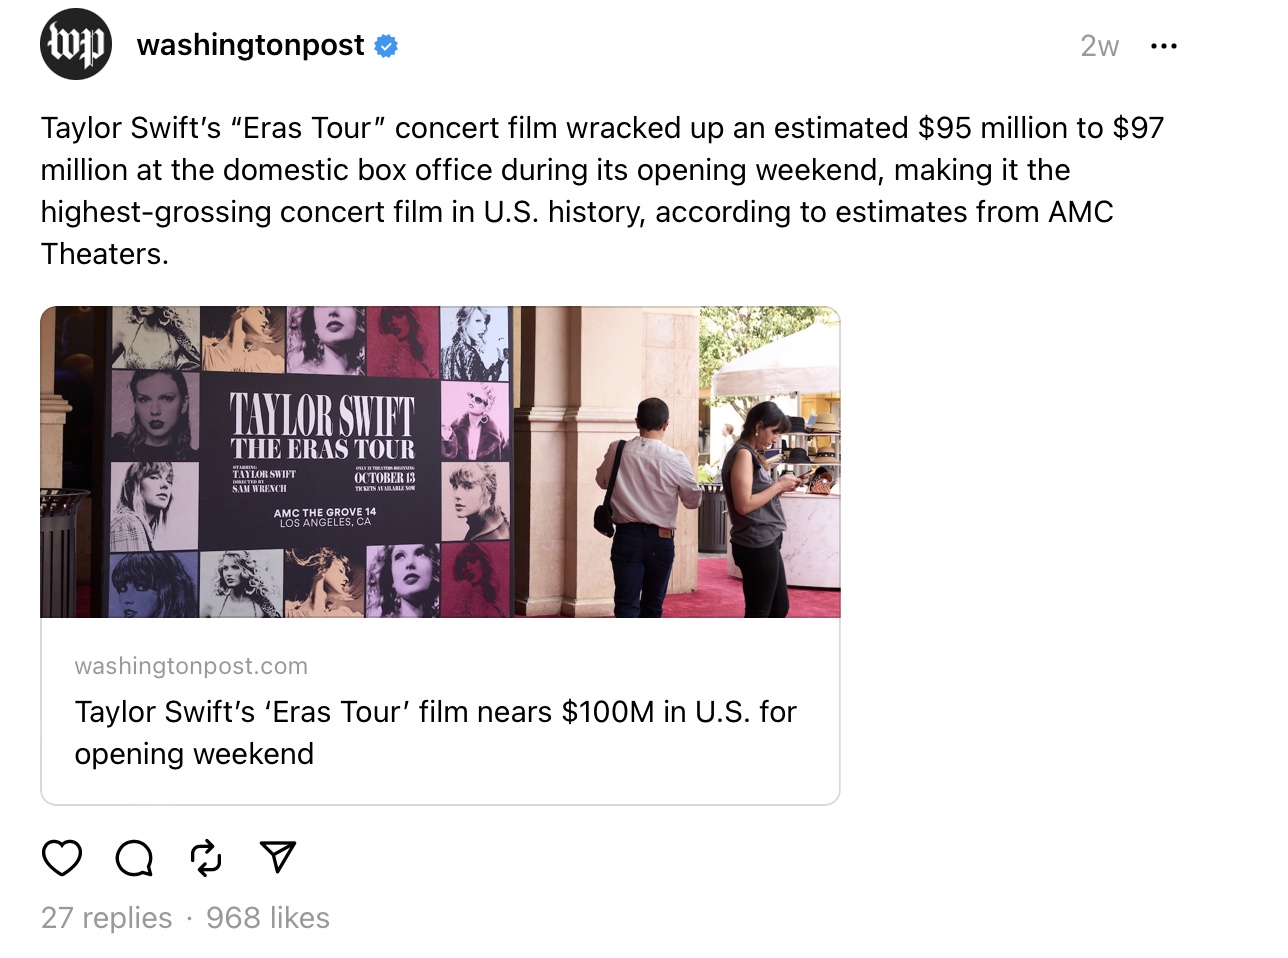 million at the domestic box office during its opening weekend, making it the highest-grossing concert film in U.S. history, according to estimates from AMC Theaters.